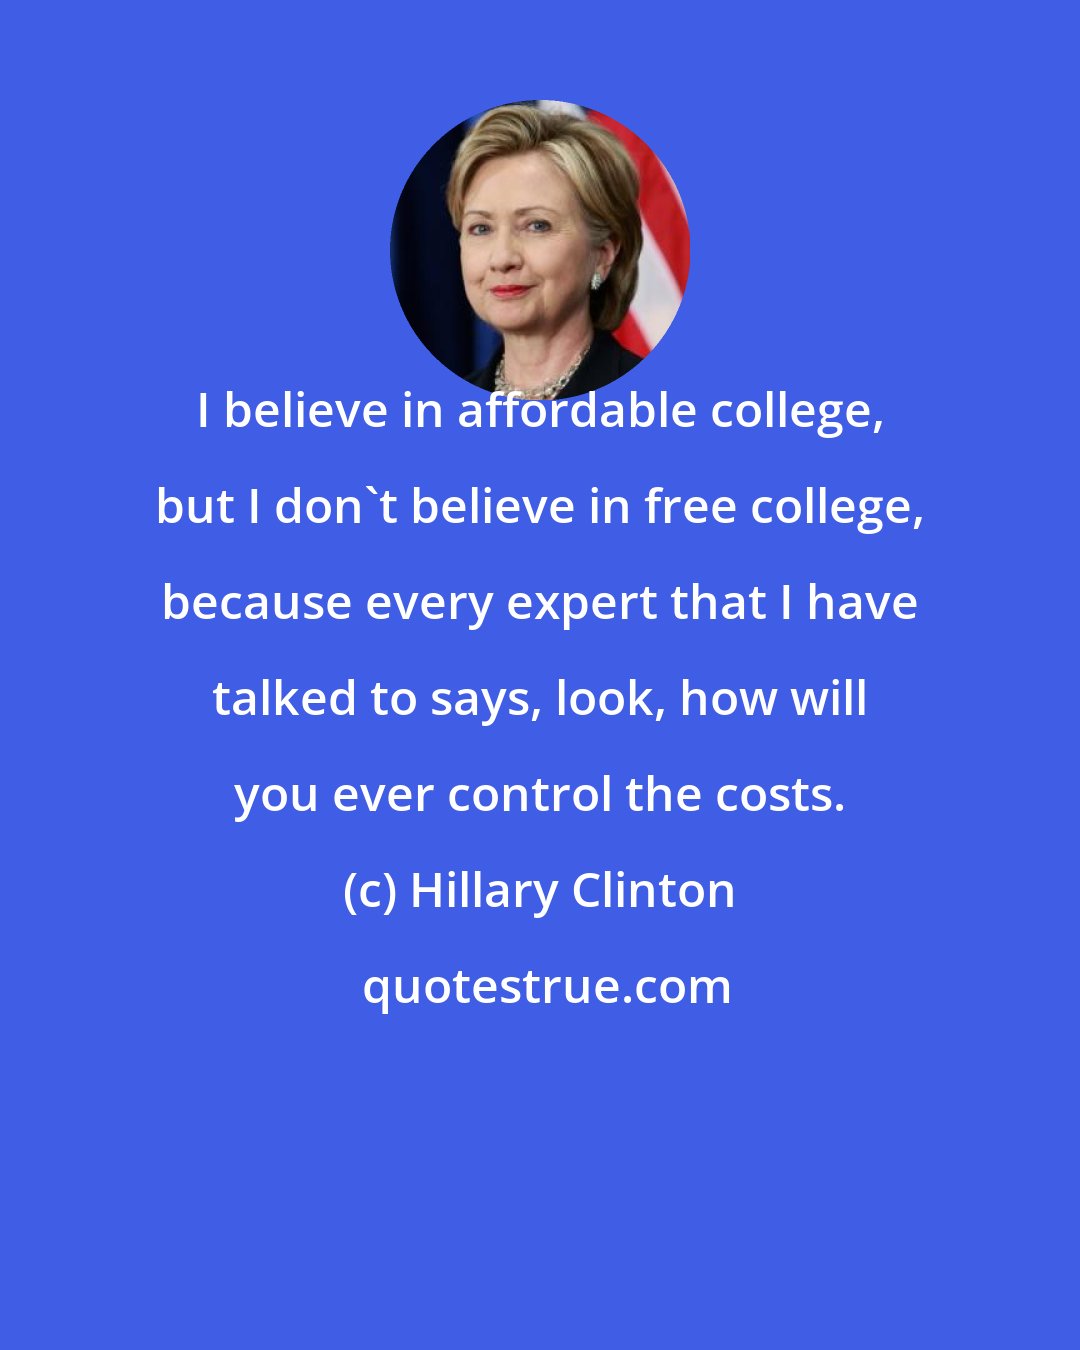 Hillary Clinton: I believe in affordable college, but I don't believe in free college, because every expert that I have talked to says, look, how will you ever control the costs.